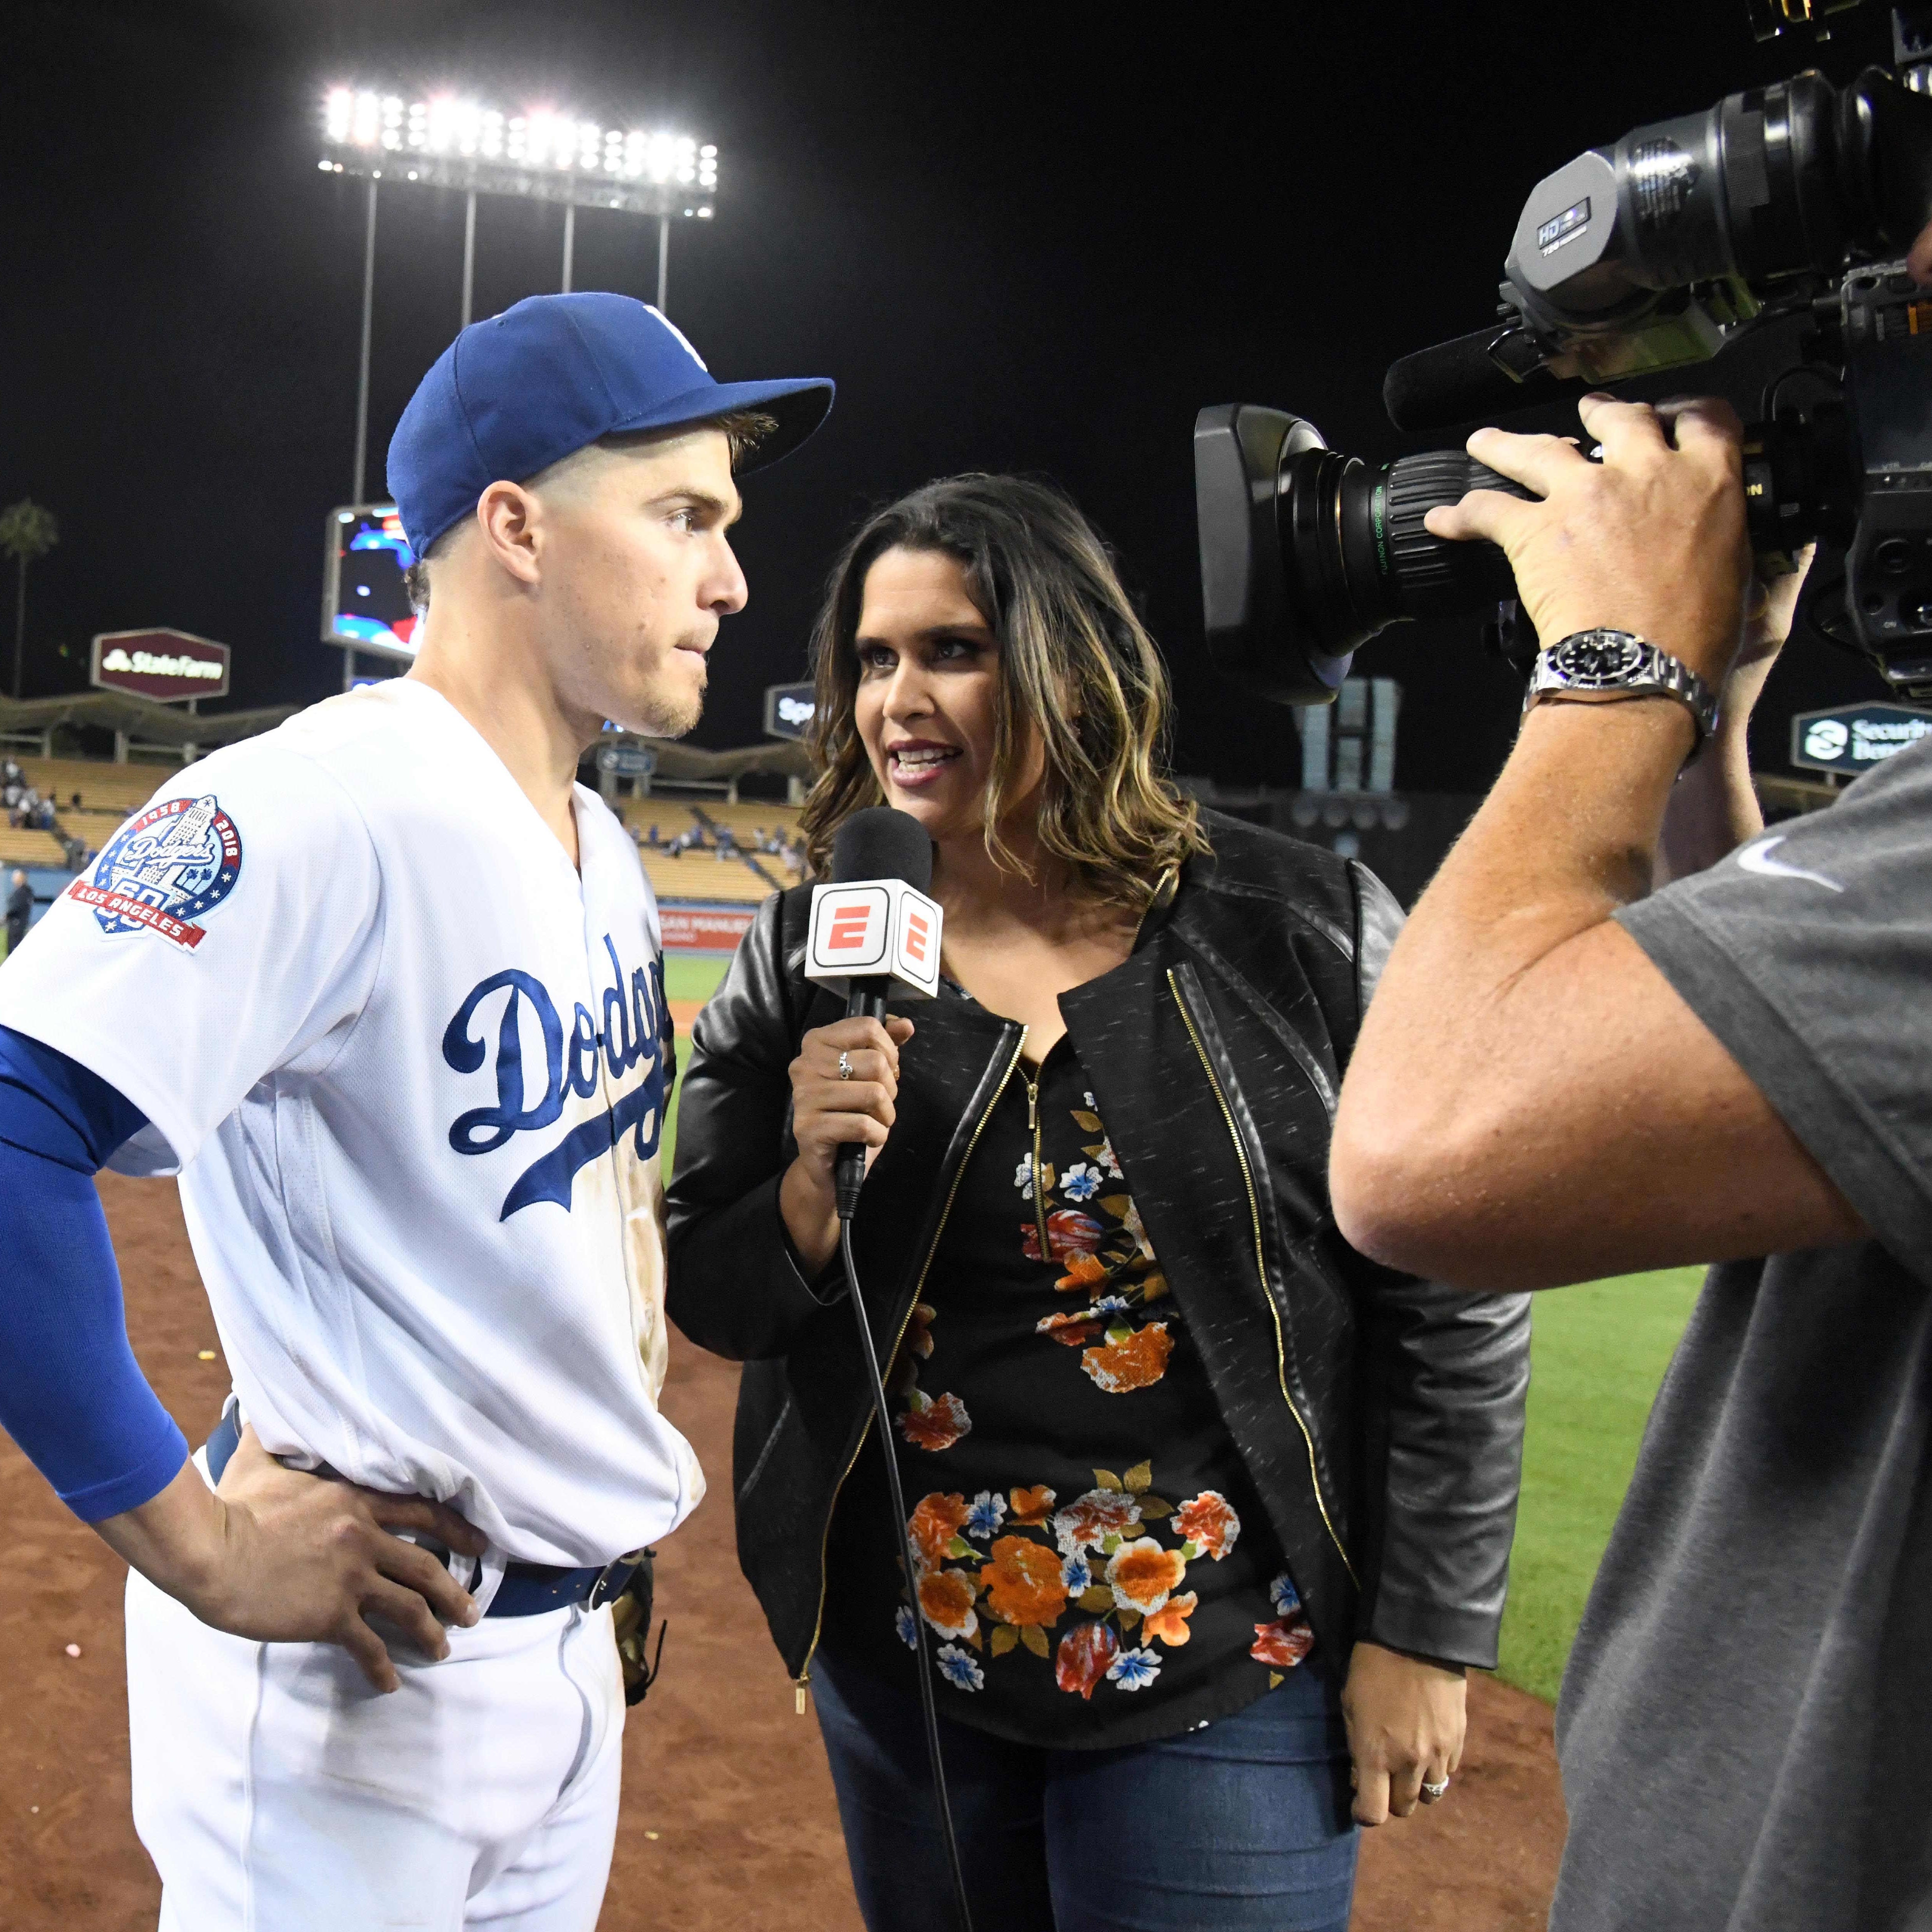 Los Angeles Dodgers shortstop Kike Hernandez (left) is interviewed by ESPN Deportes broadcaster Marly Rivera after the game against the Chicago Cubs at Dodger Stadium on Jun 25, 2018.